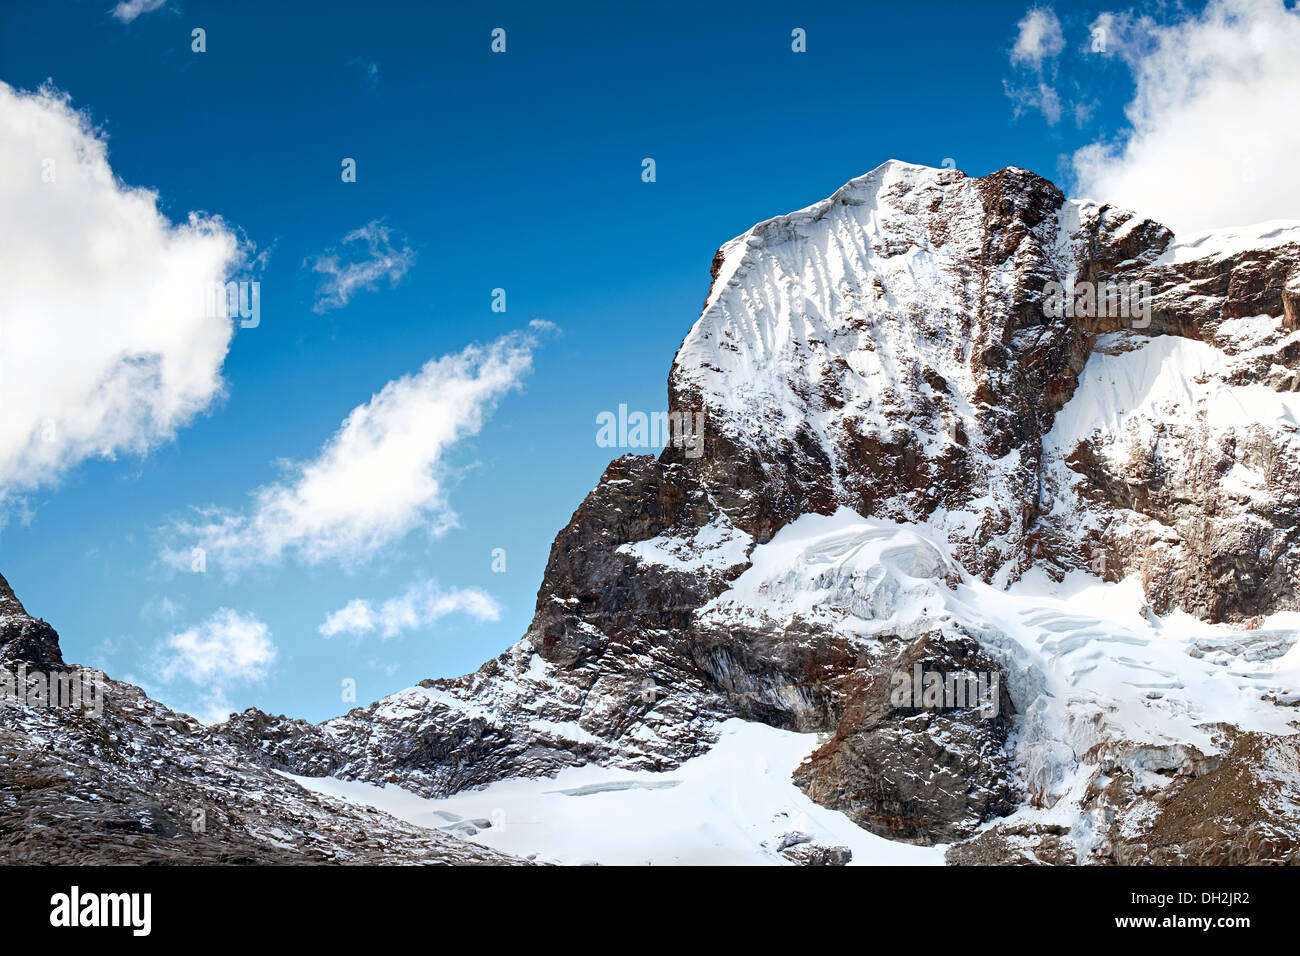 Nev Churup Summit, Huascaran National Park in the Andes, South America. Stock Photo